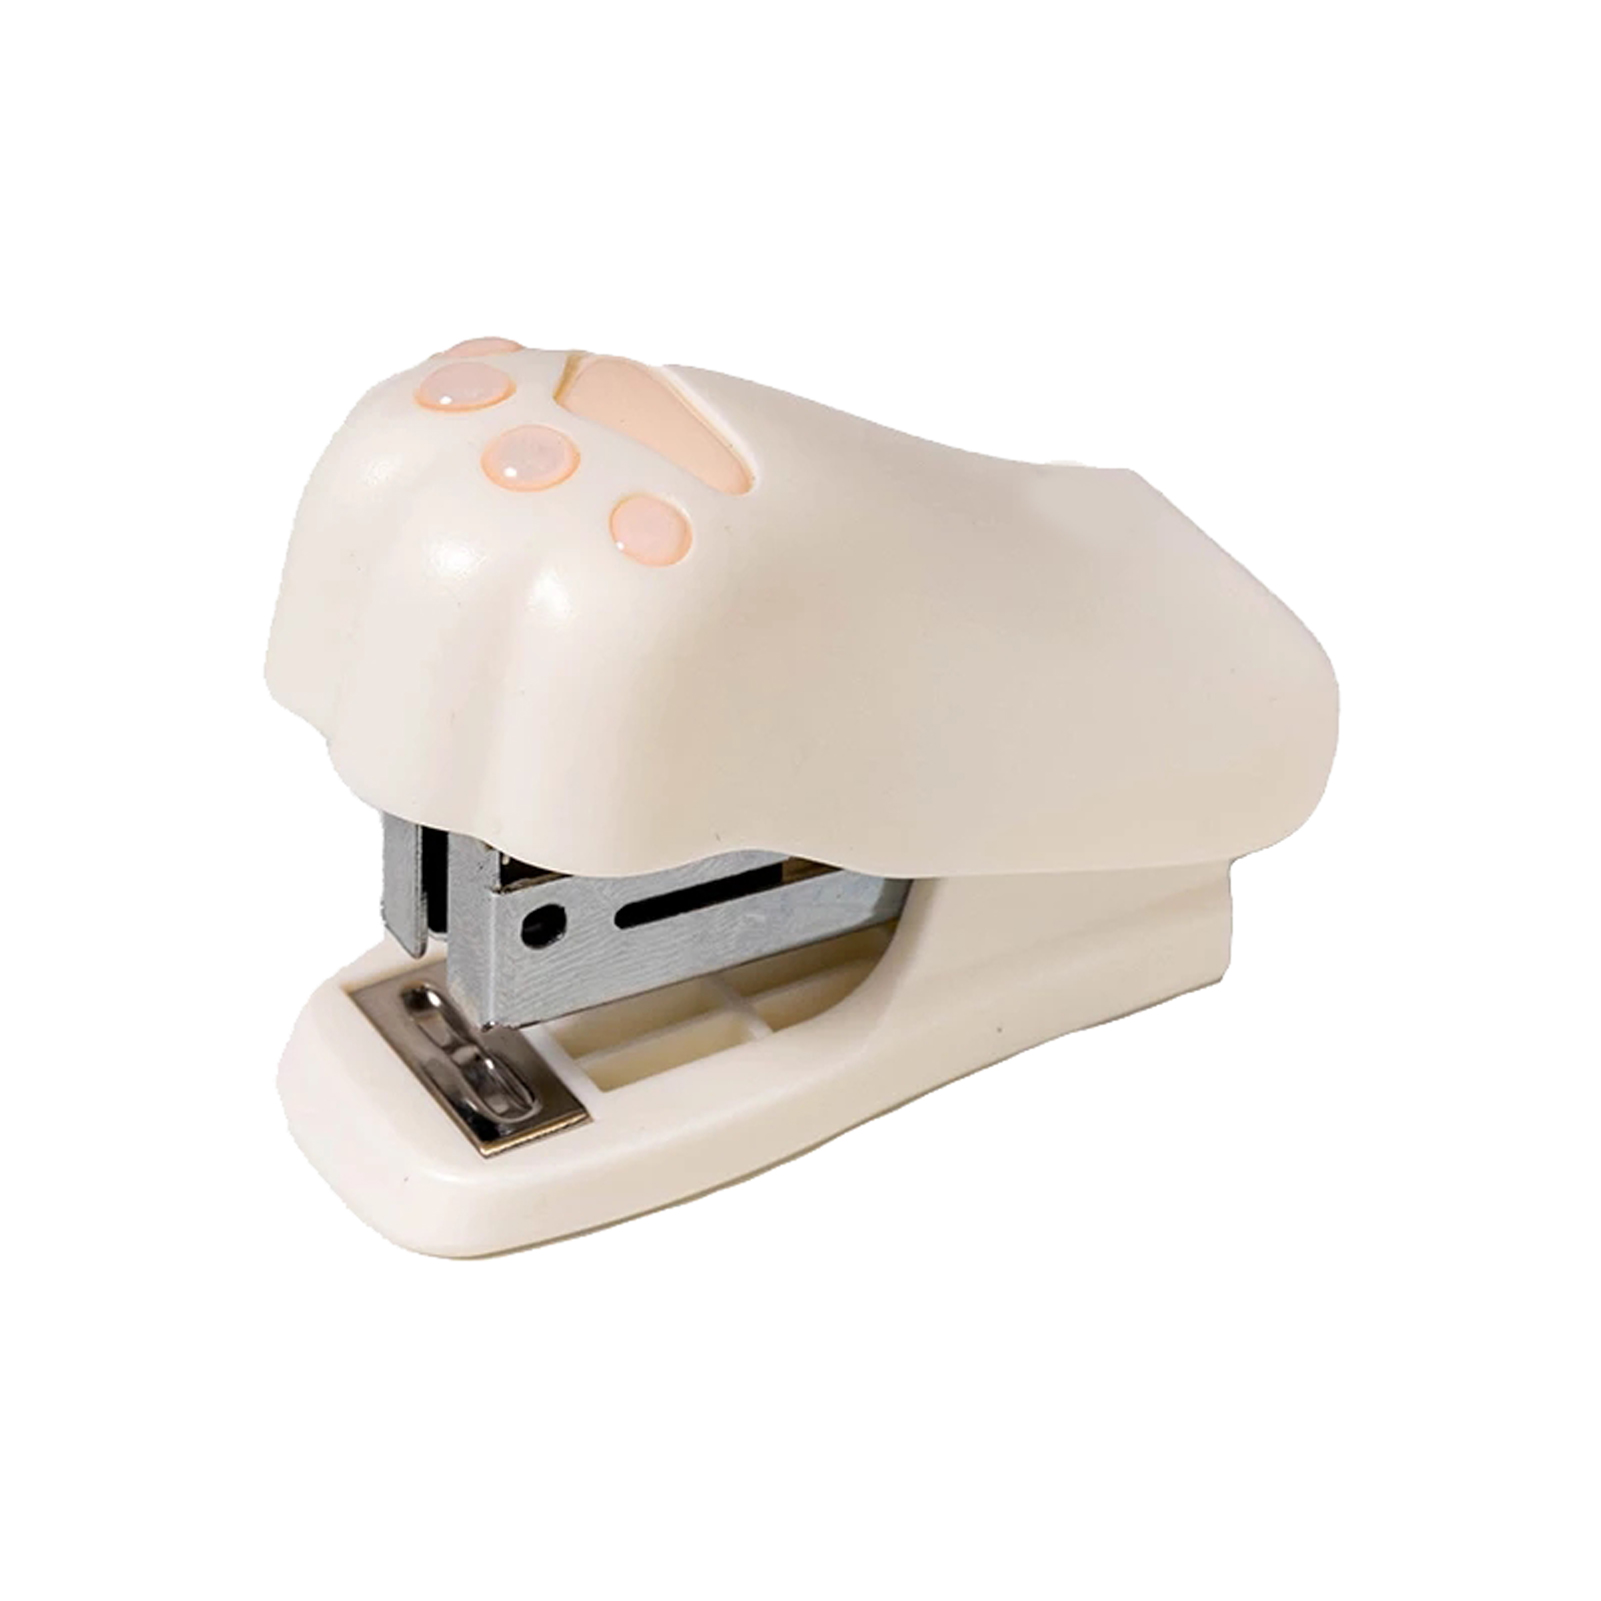 Bookbinding Machine School Portable Cute Office Mini Stapler Student With 1000pcs Staples Cat Paw Shape Paper Binder Stationery